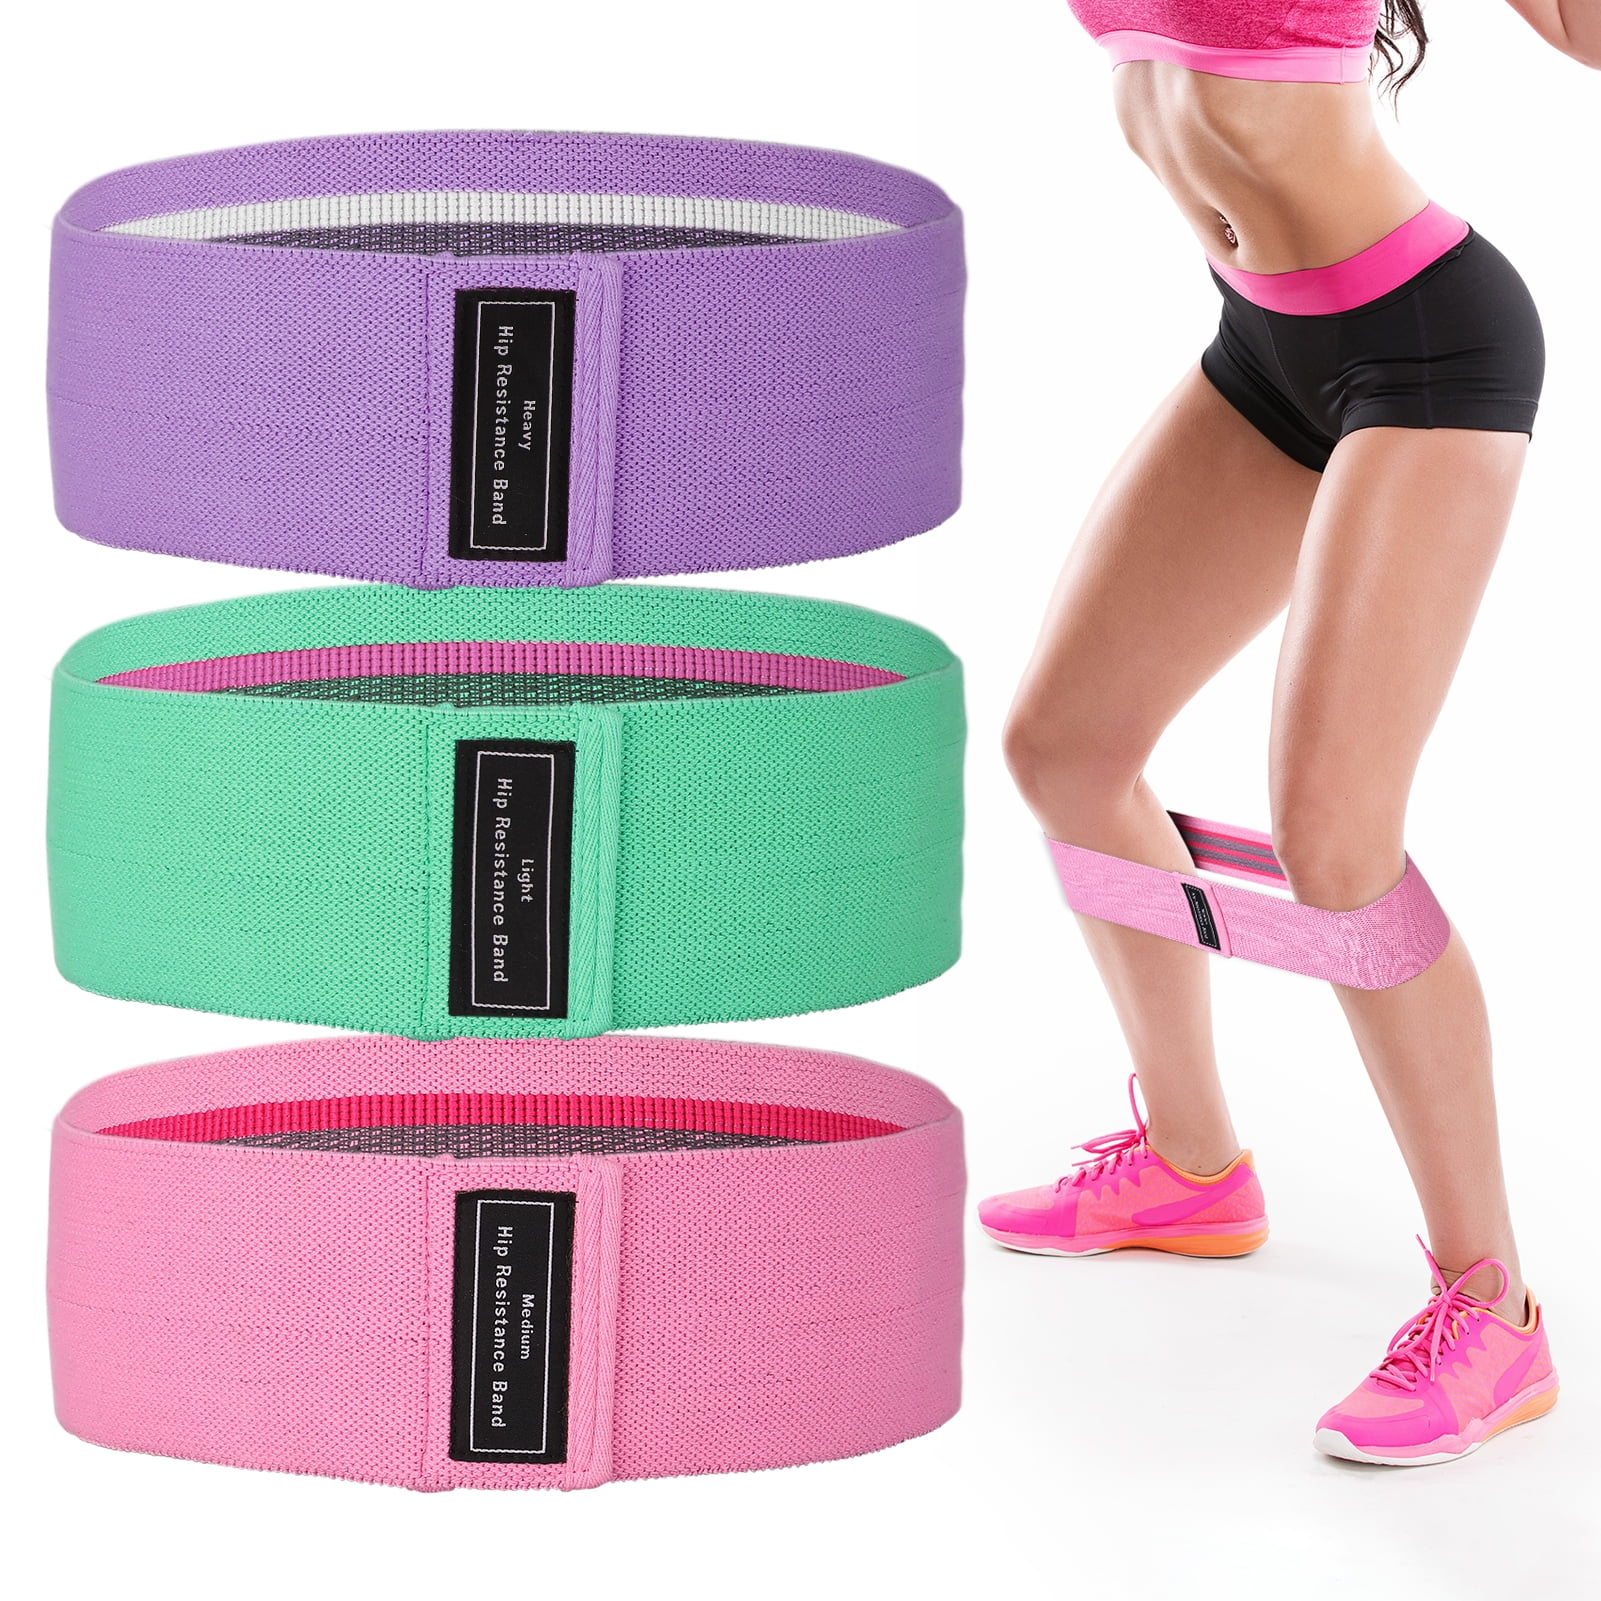 Leg Thigh Squat Band Bundle with Resistance Elastic Belt & Support Pads Workout Lifter Set I Am Extrema Booty Bands Kit for Women Glute 